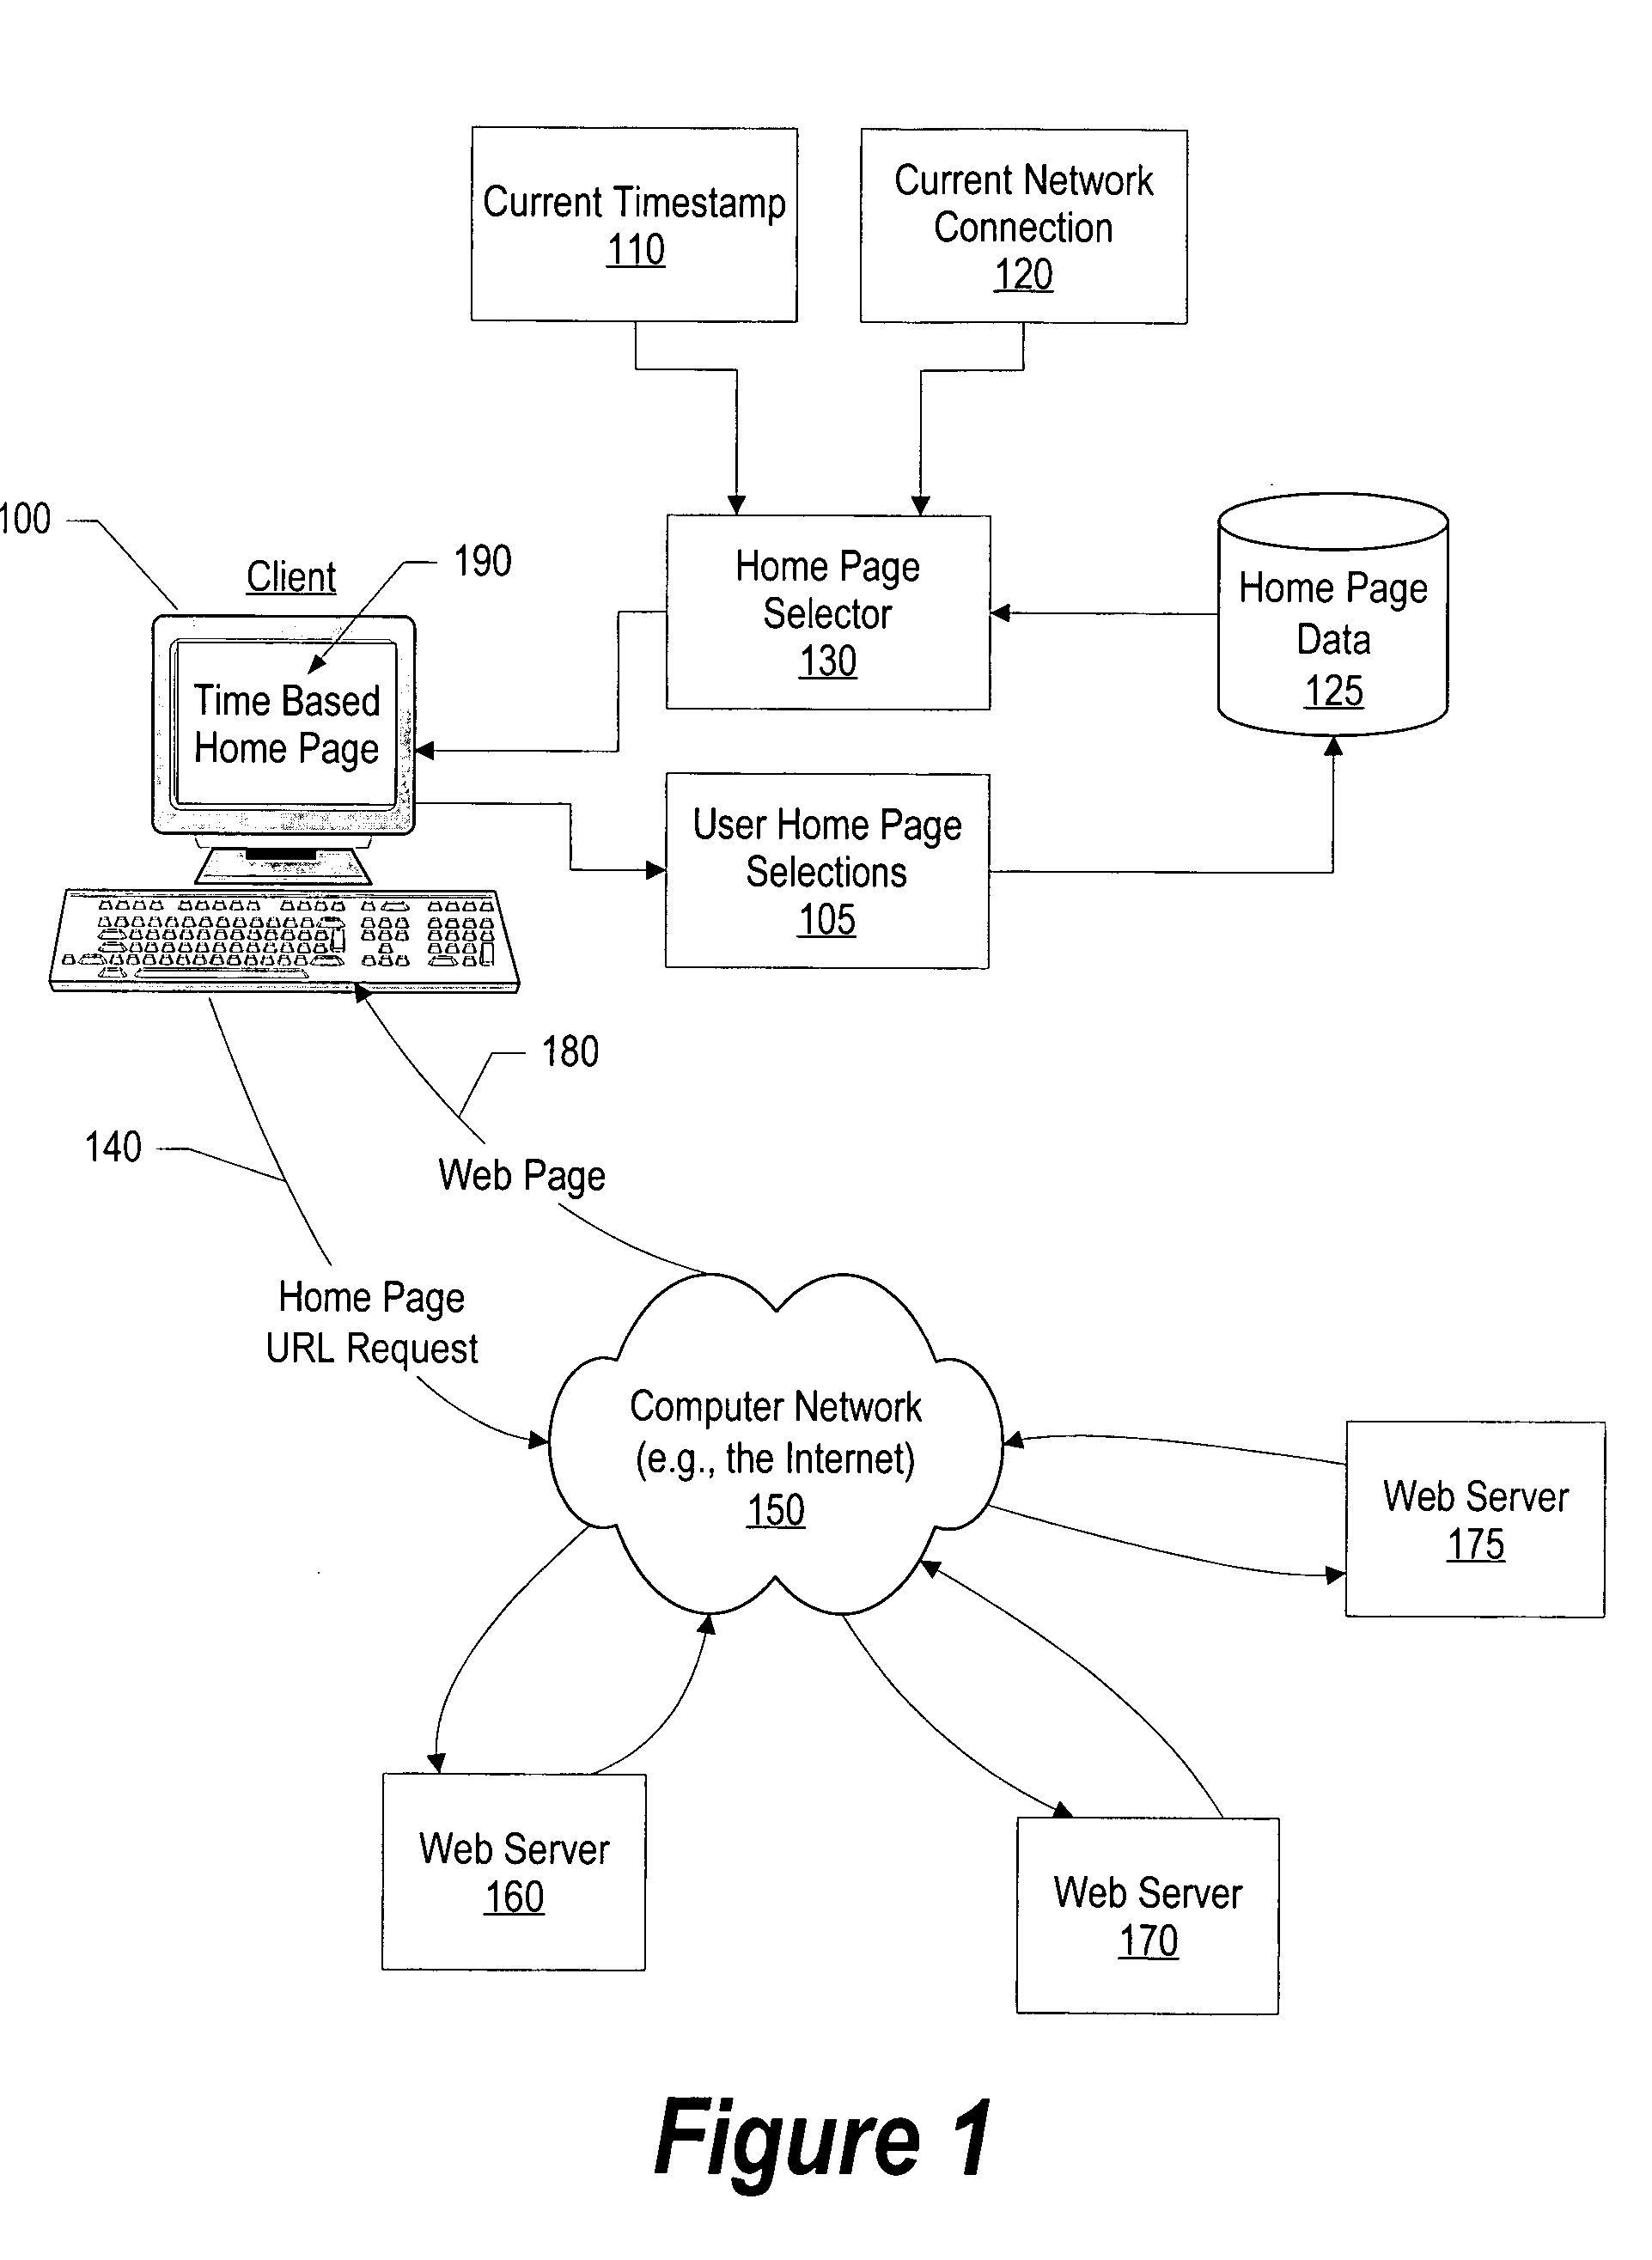 System and method for time based home page selection